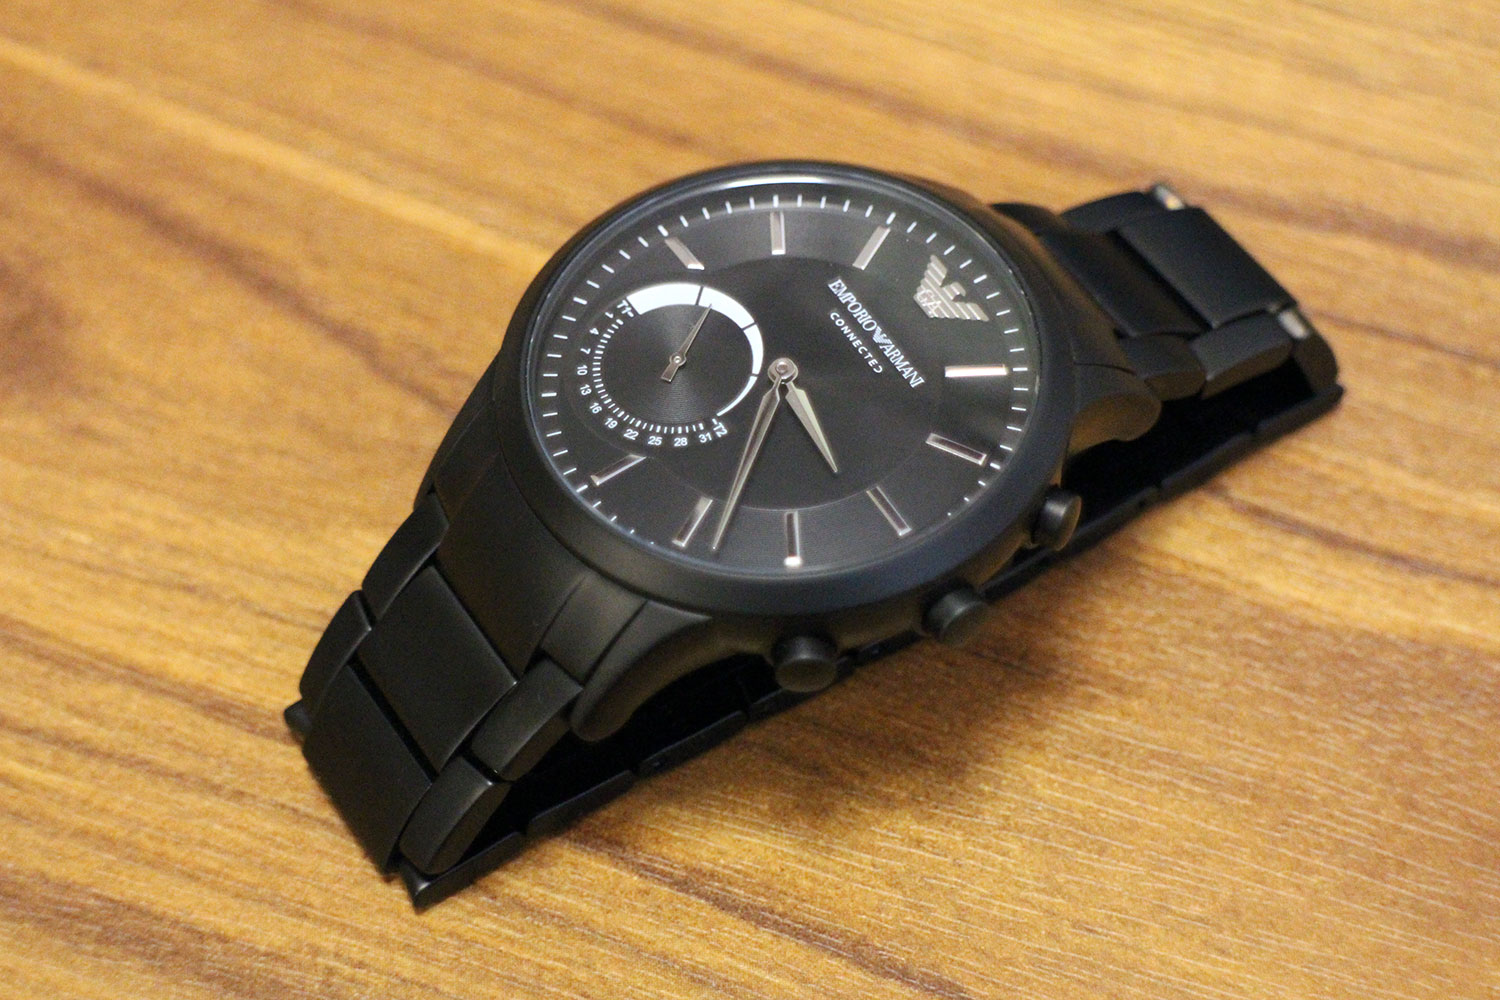 Emporio Armani EA Connected Watch: Review, Features, Price 